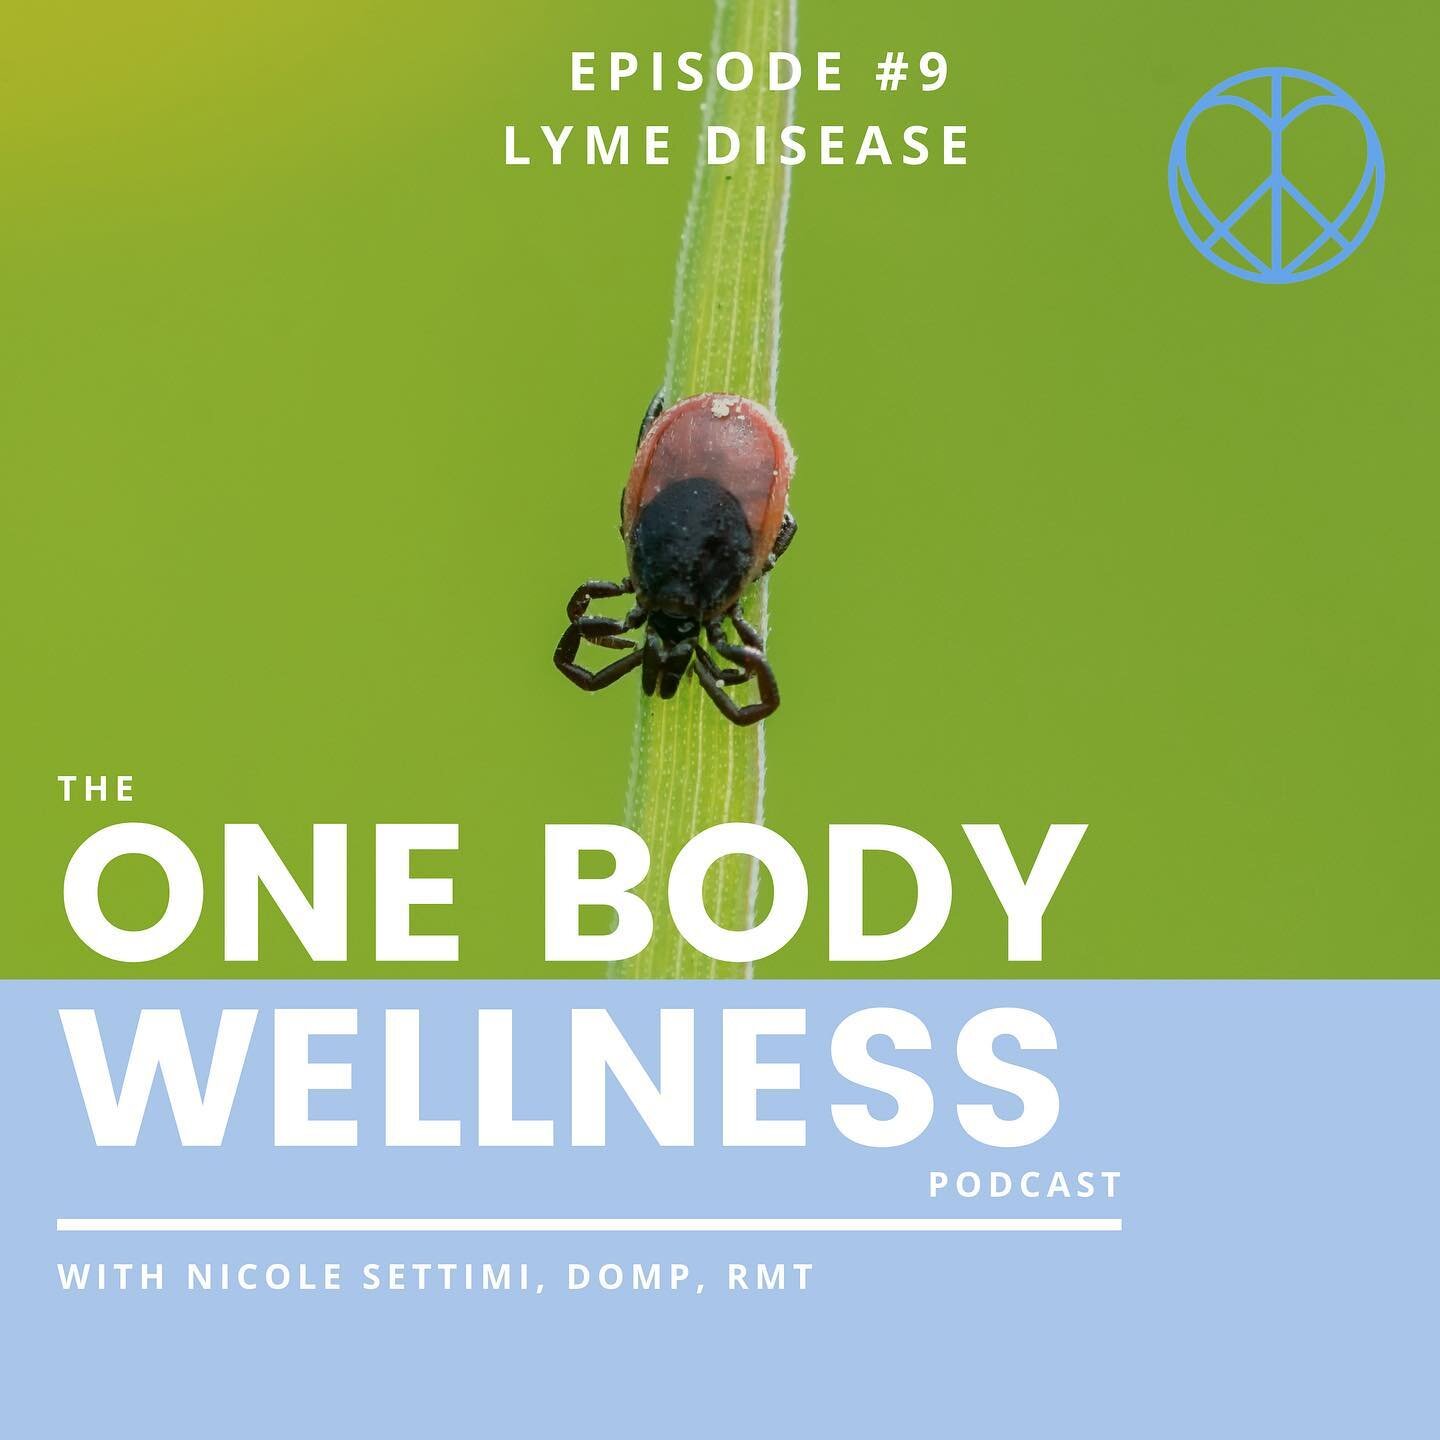 LYME DISEASE &bull; Episode #9 is all about Lyme disease.

The question I want to ask you is:

Instead of fearing Lyme disease and ticks, how can we be symbiotic with nature, to co-exist, and to protect ourselves, and the environment in the meantime?